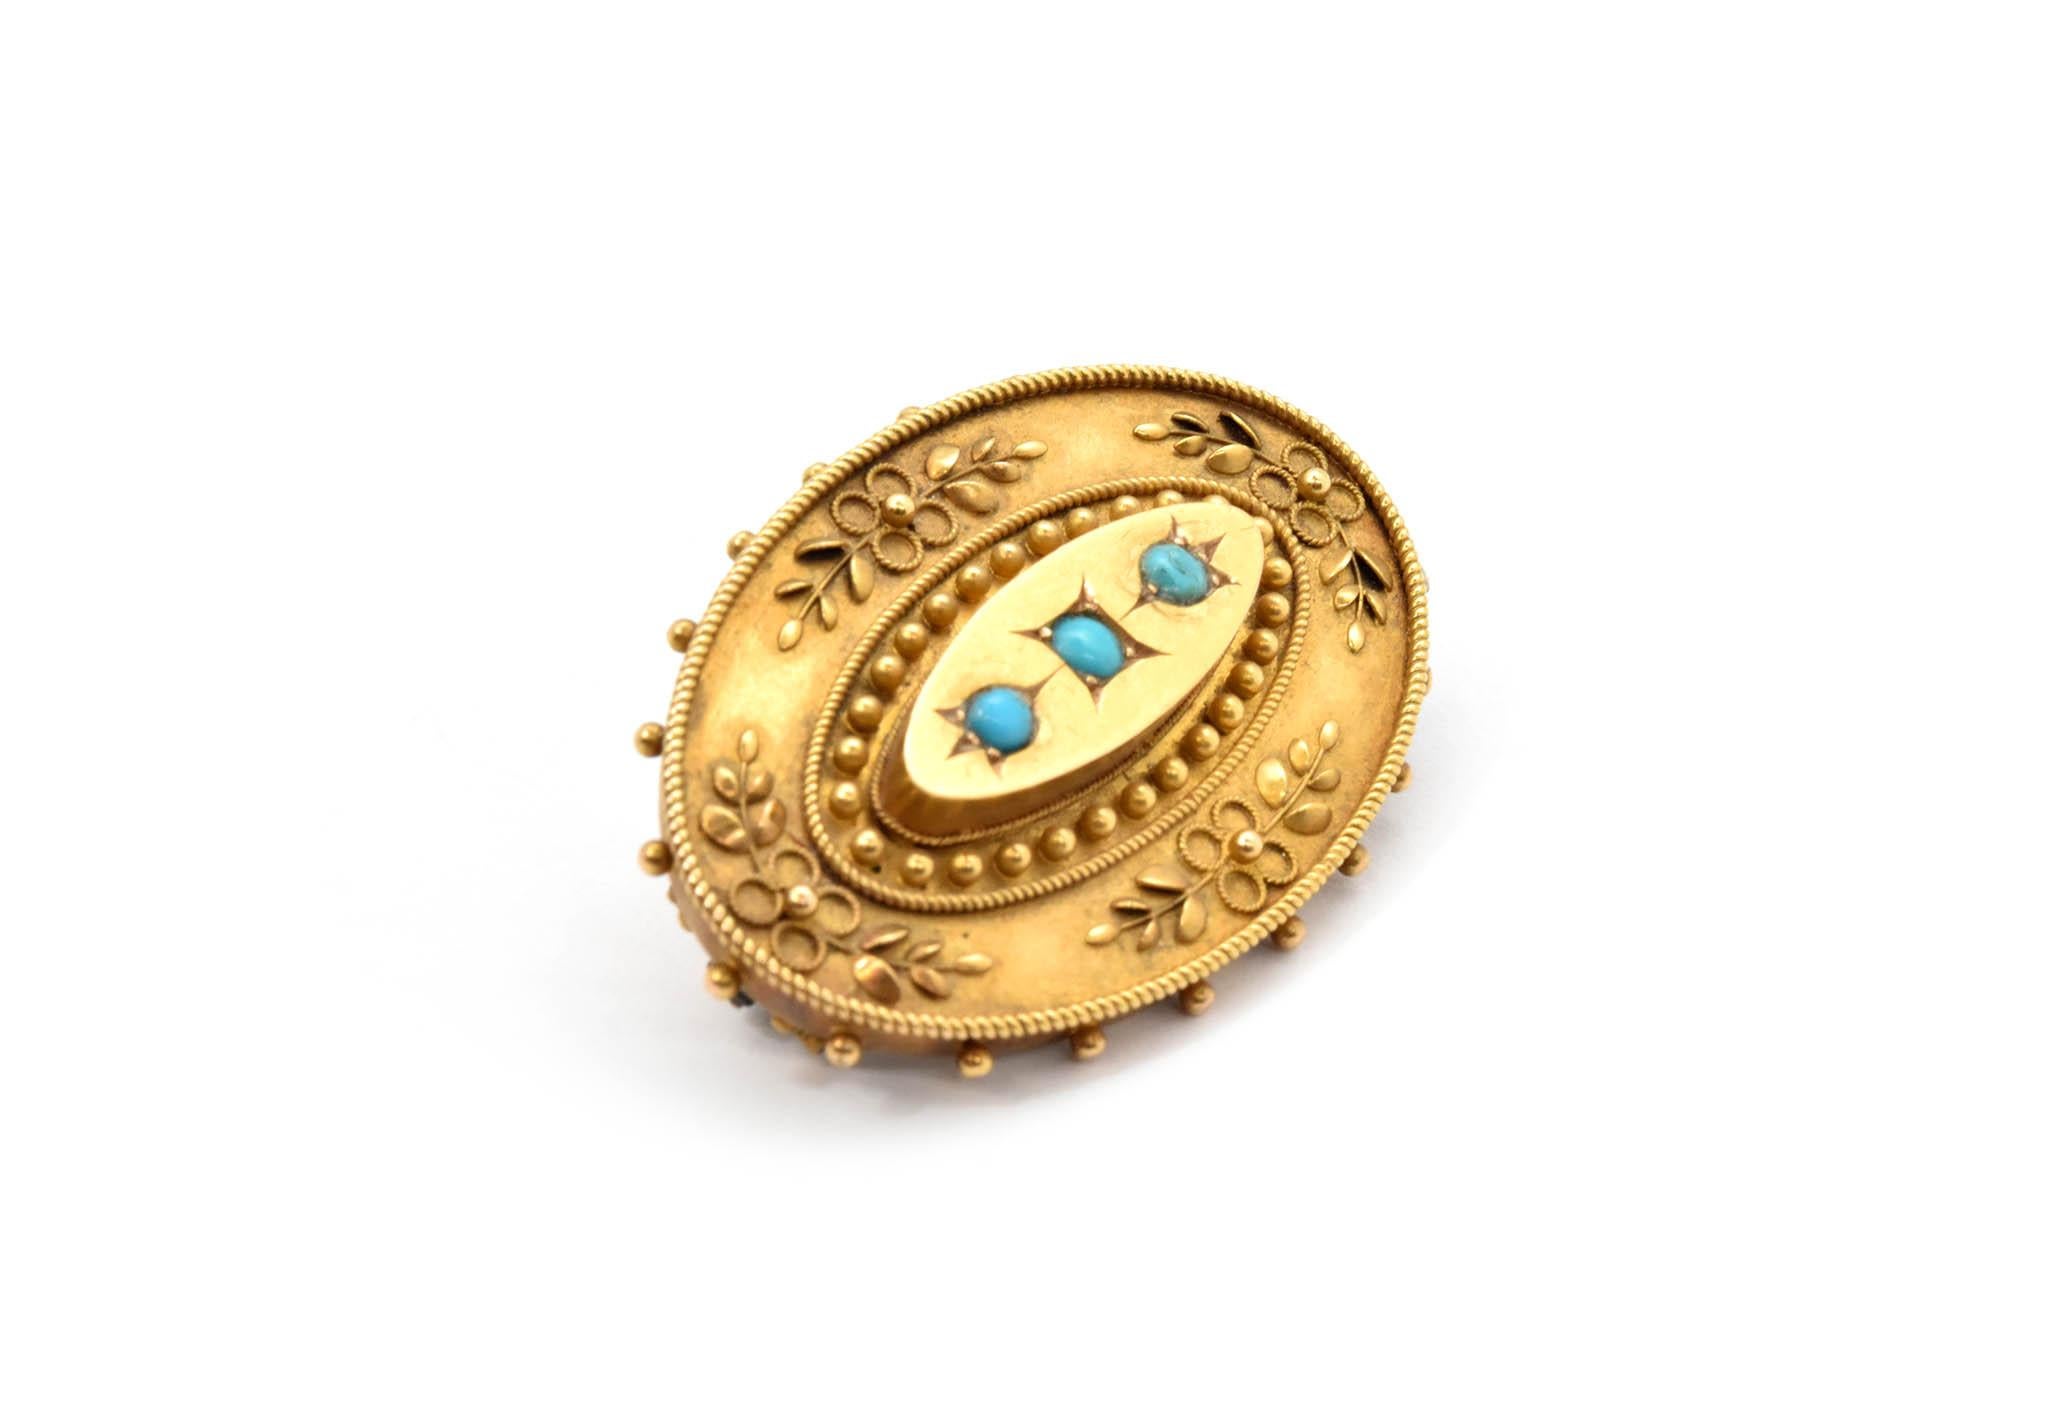 This 15k yellow gold pin is set with 3 small turquoise beads. Each bead measures about 3mm in diameter. The pin measures 25x40mm and weighs 10.2 grams. The back of the pin is stamped “15ct.” 